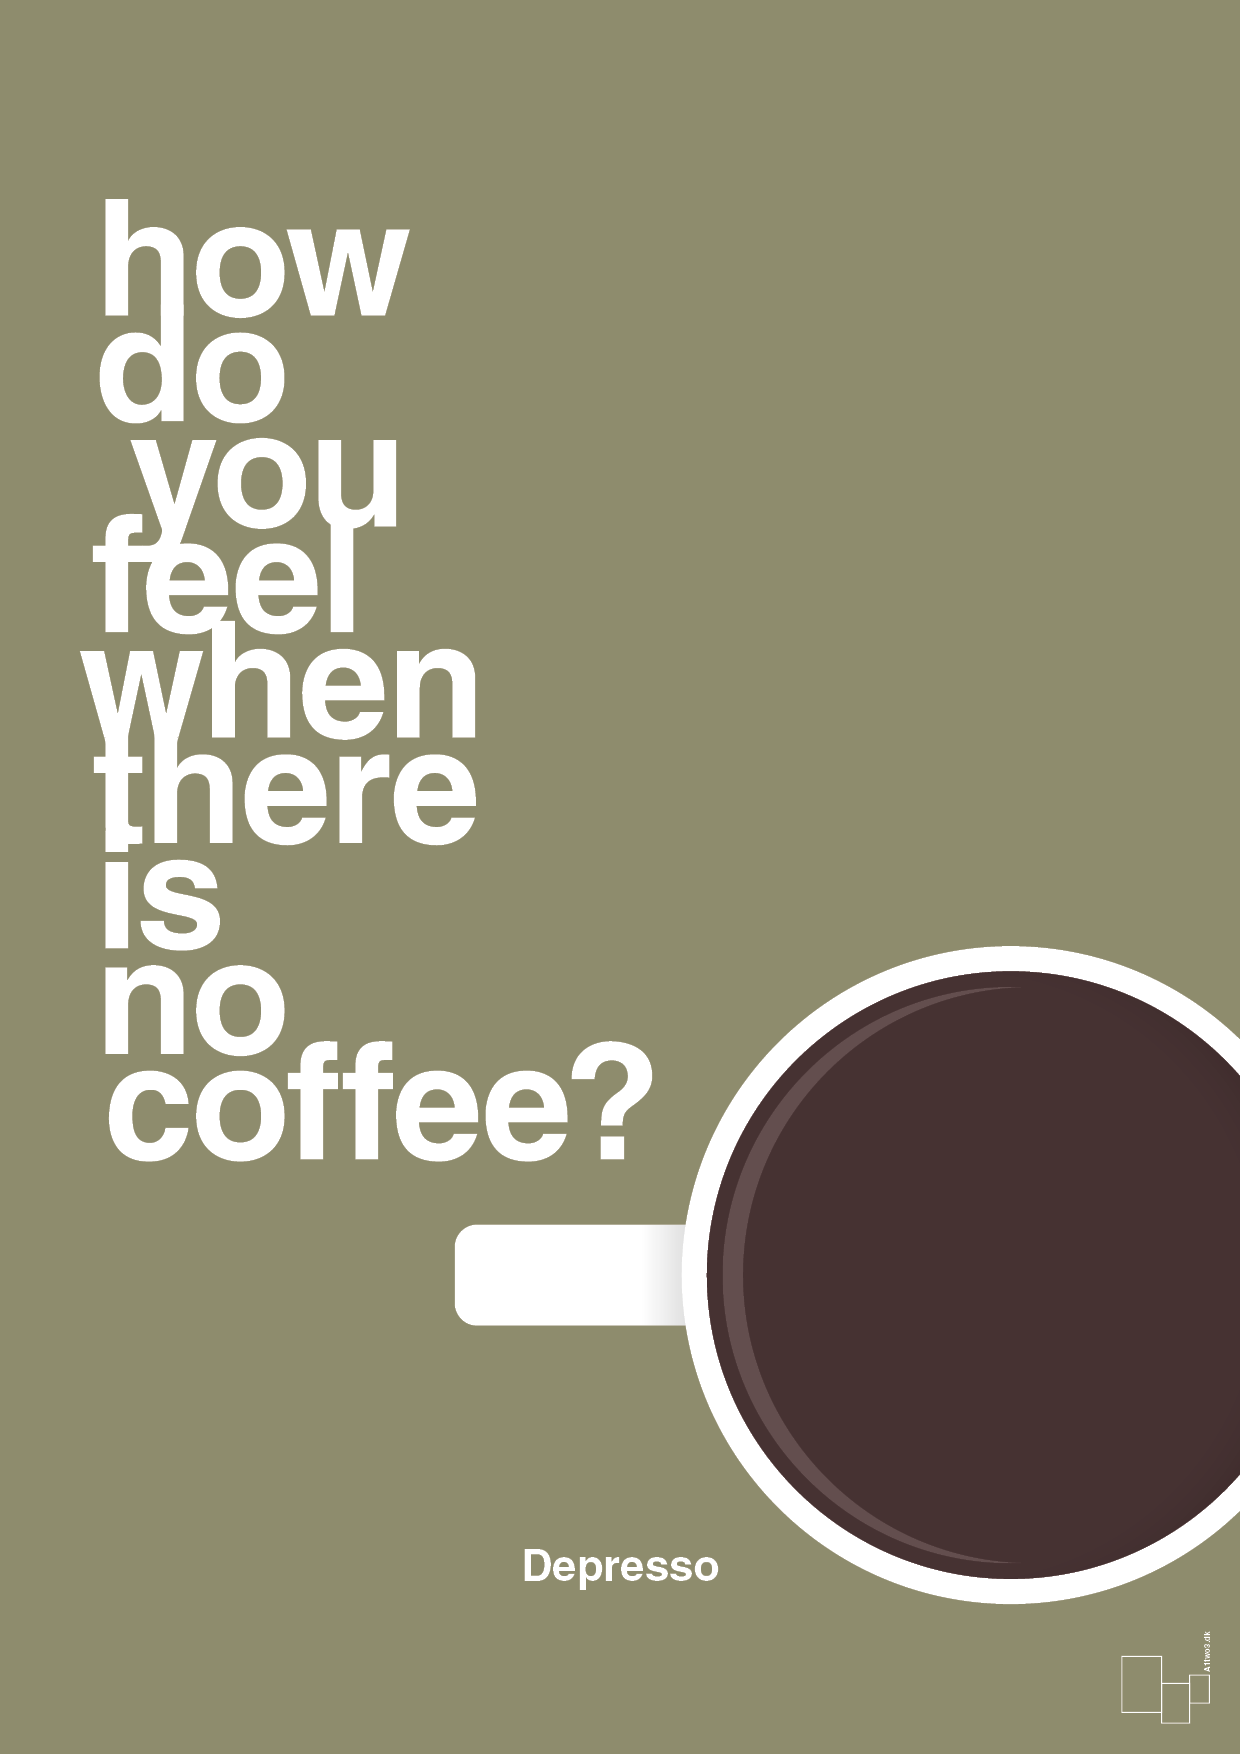 how do you feel when there is no coffee? depresso - Plakat med Mad & Drikke i Misty Forrest